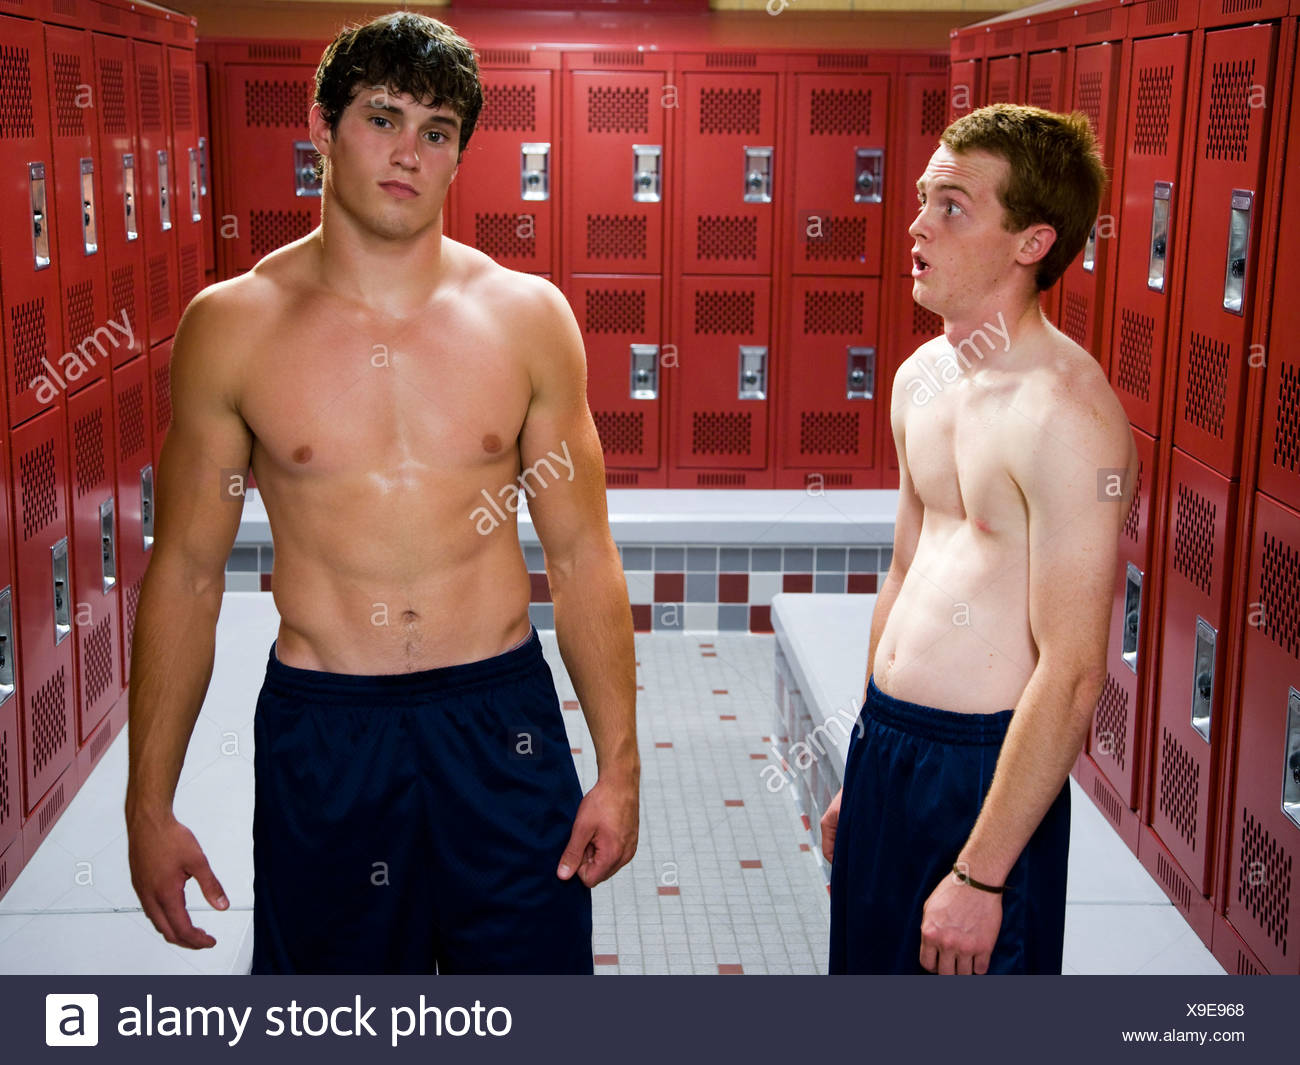 Two High School Students In A Locker Room Stock Photo